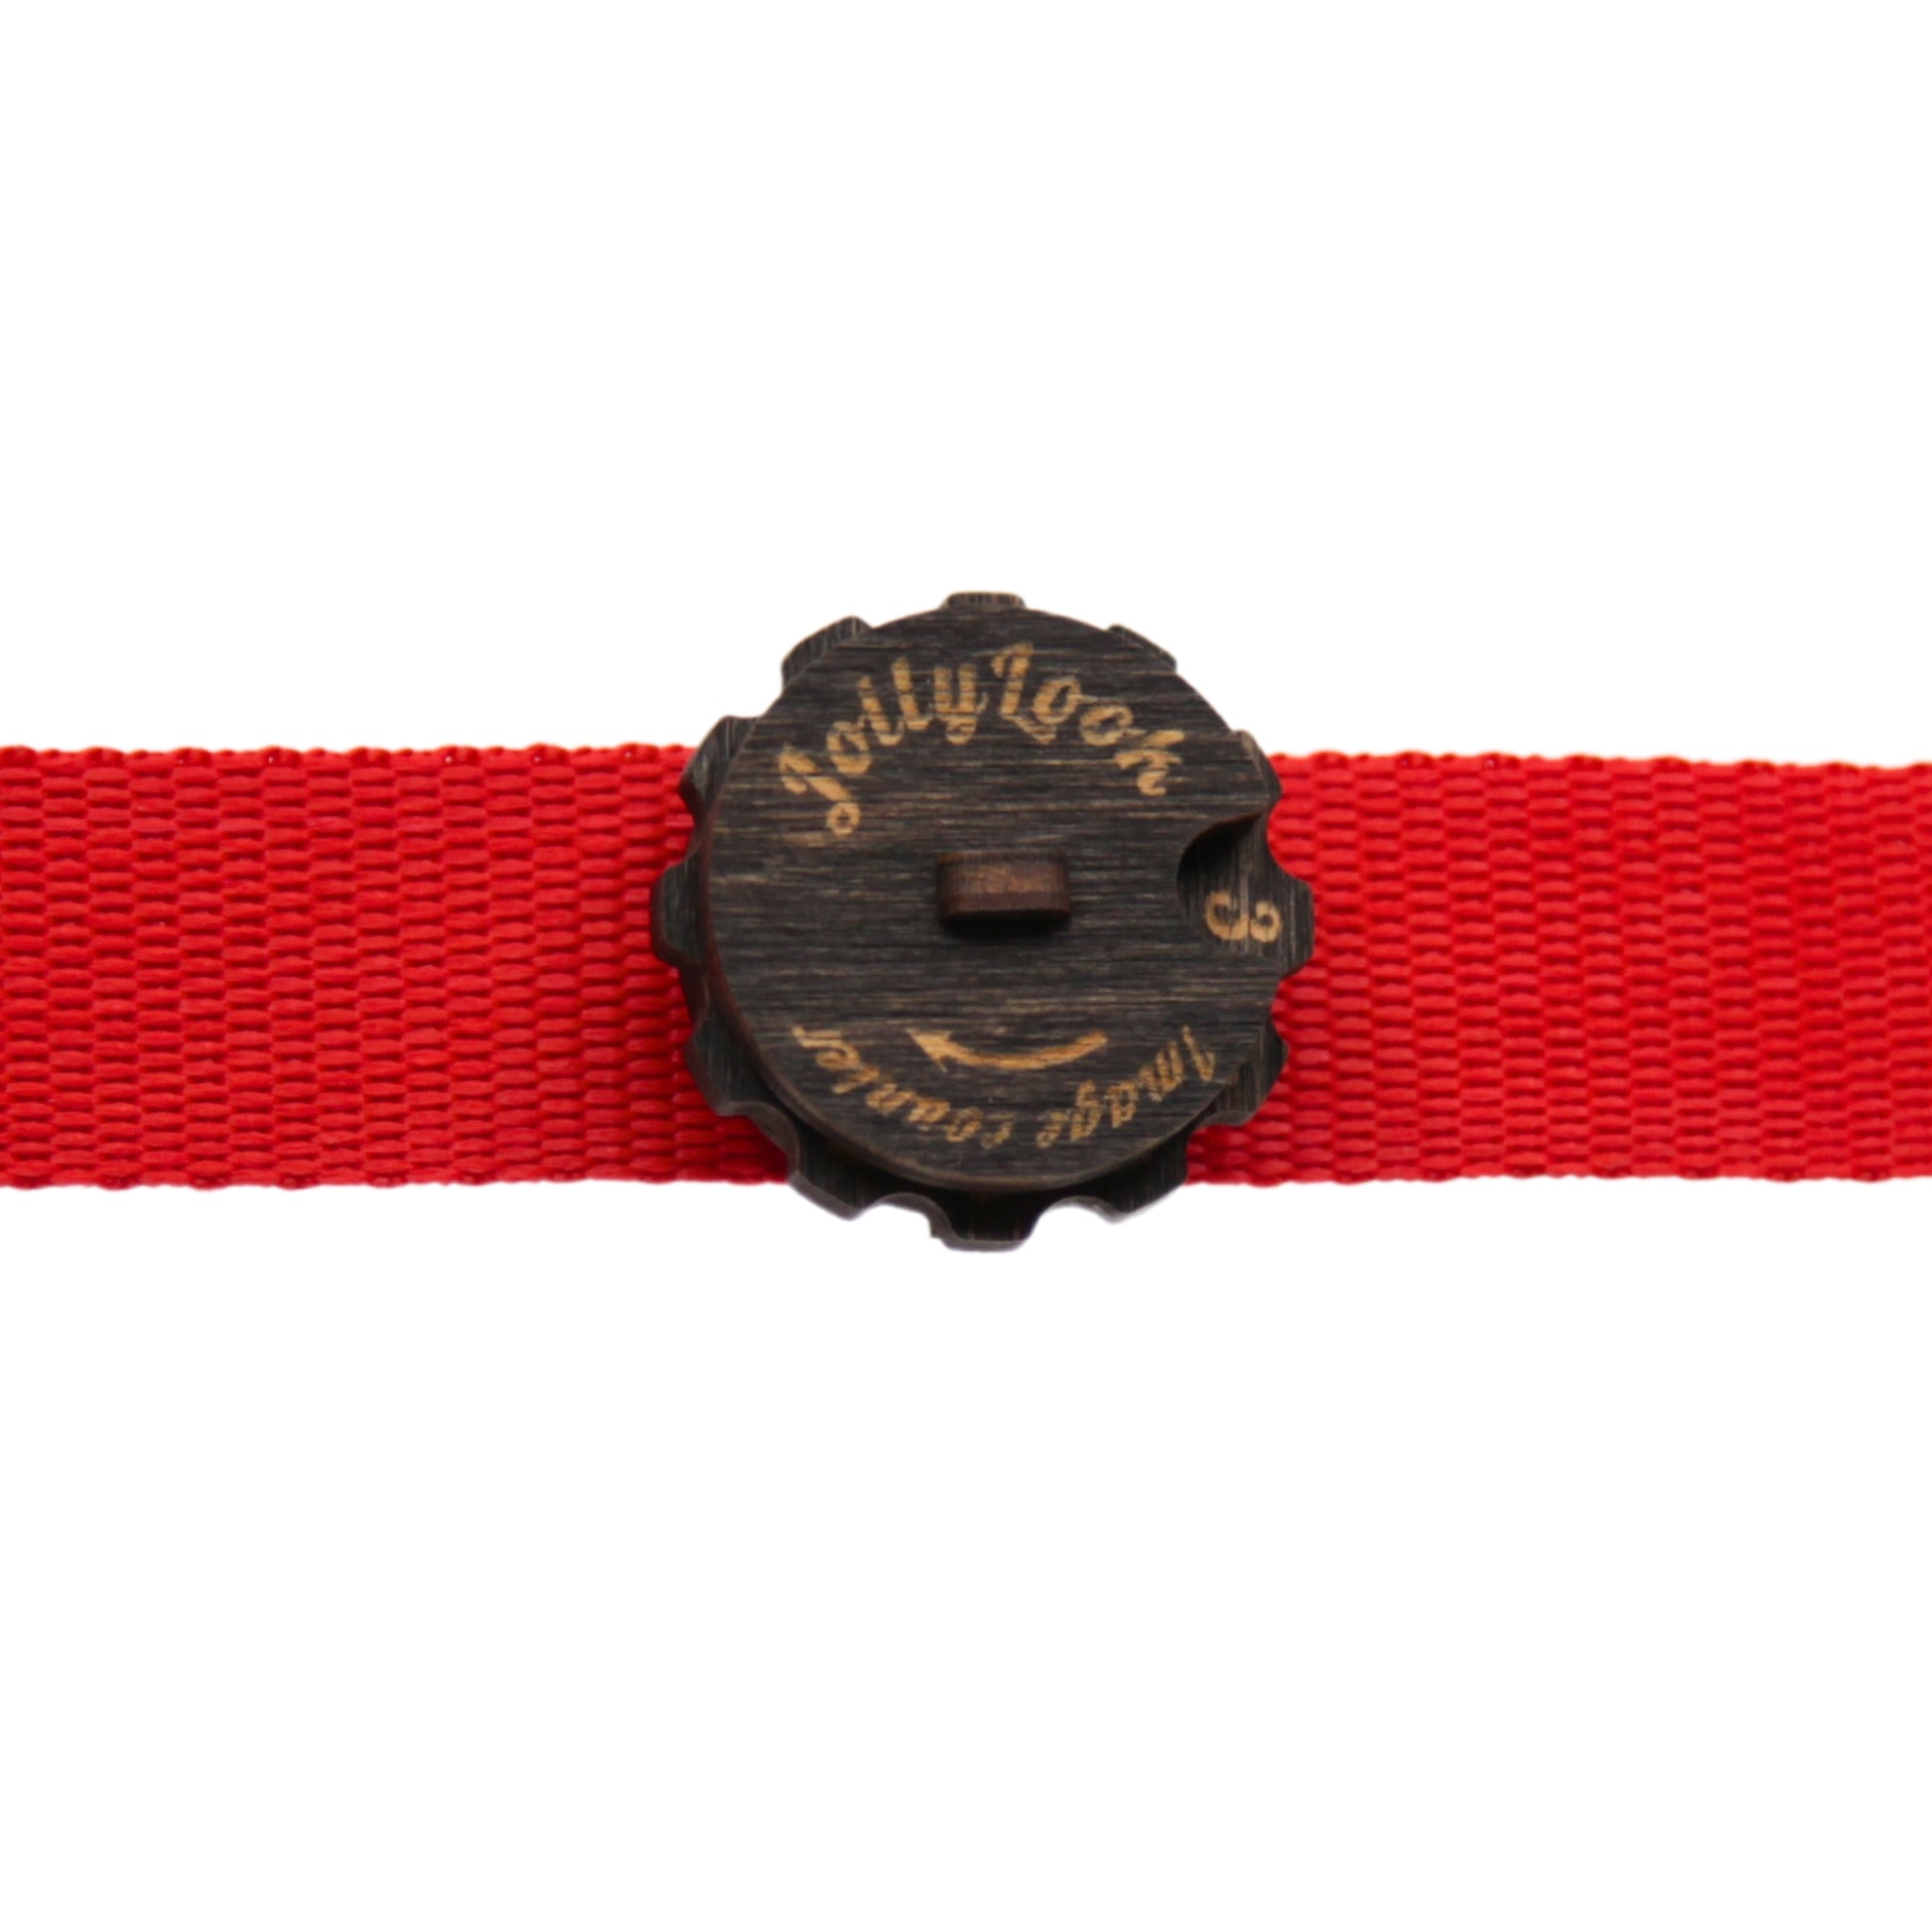 A round wooden image counter in Stained Brown Color featuring the Jollylook logo on a red strap for keeping track of how many images remain in your Instax film cartridge